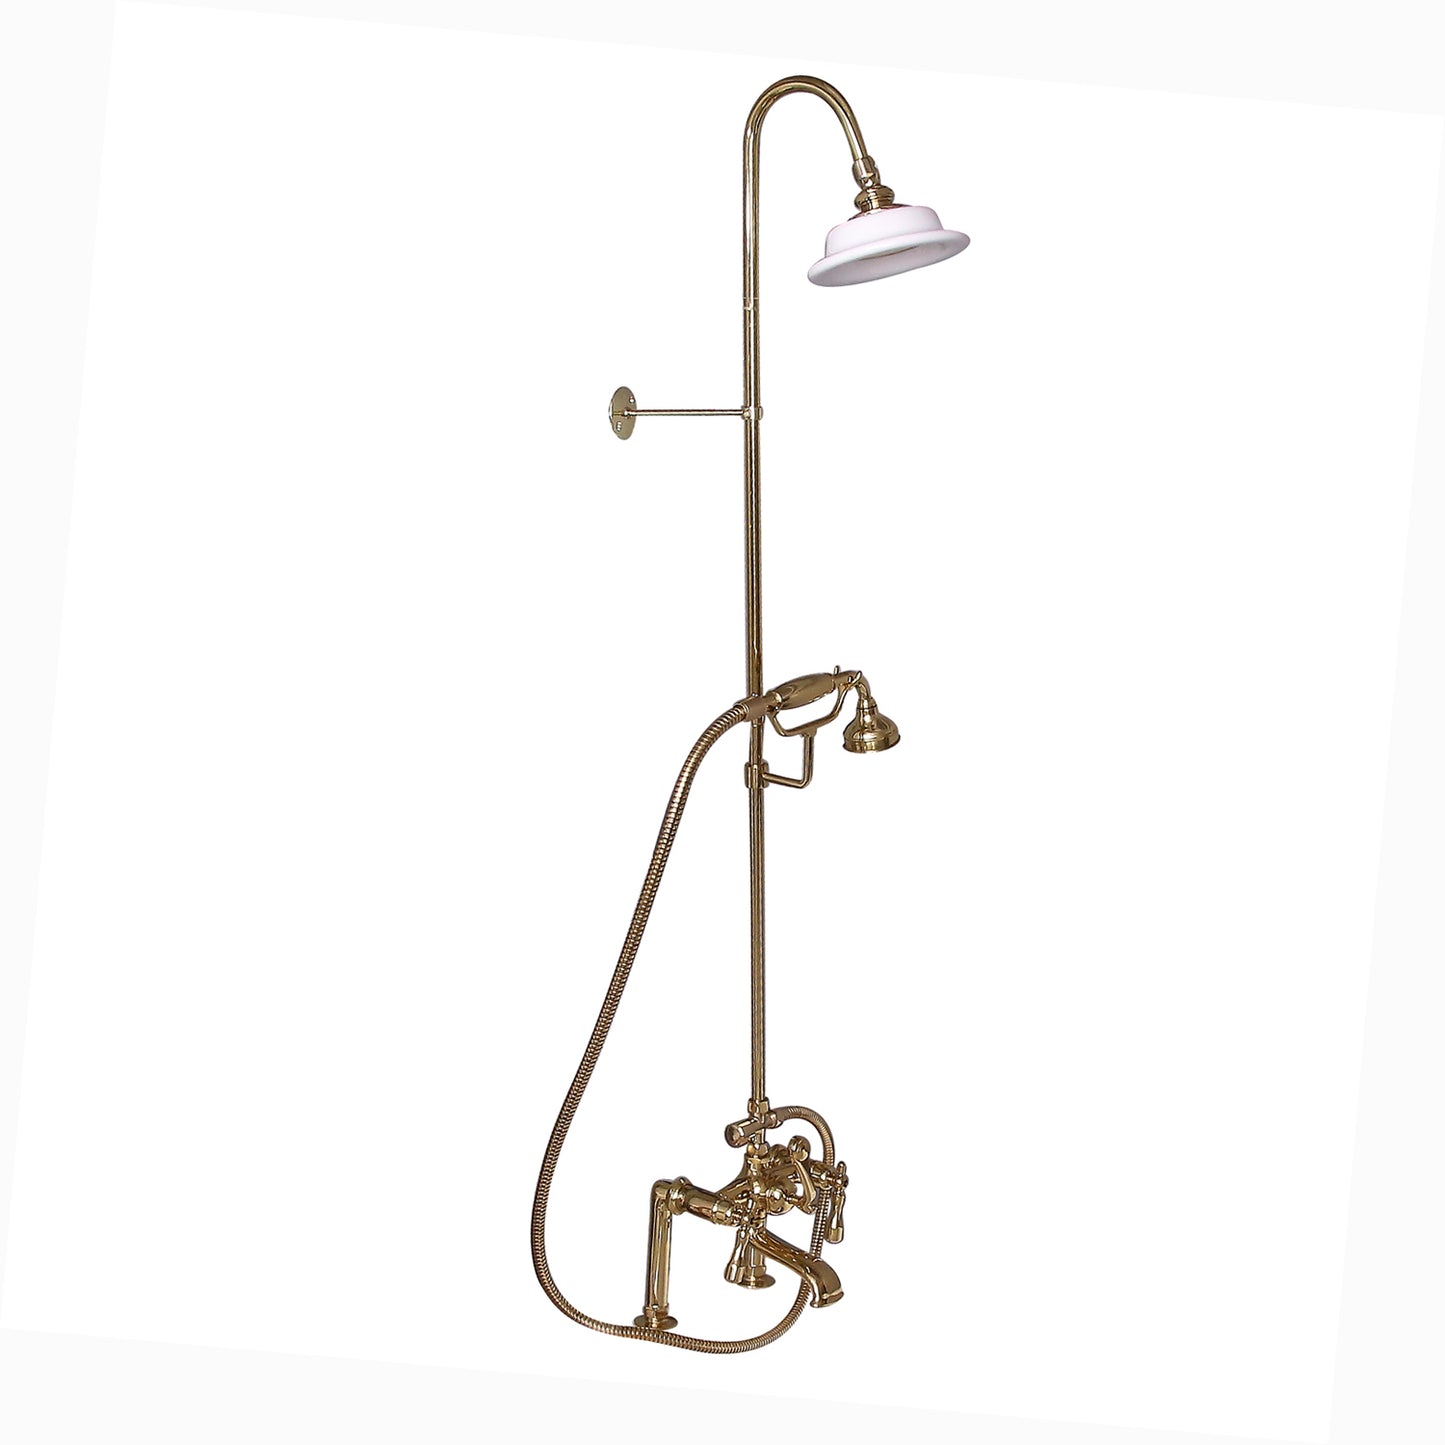 Tub Faucet Kit with 62" Riser, Shower Head, Hand Shower, Lever Handles in Polished Brass